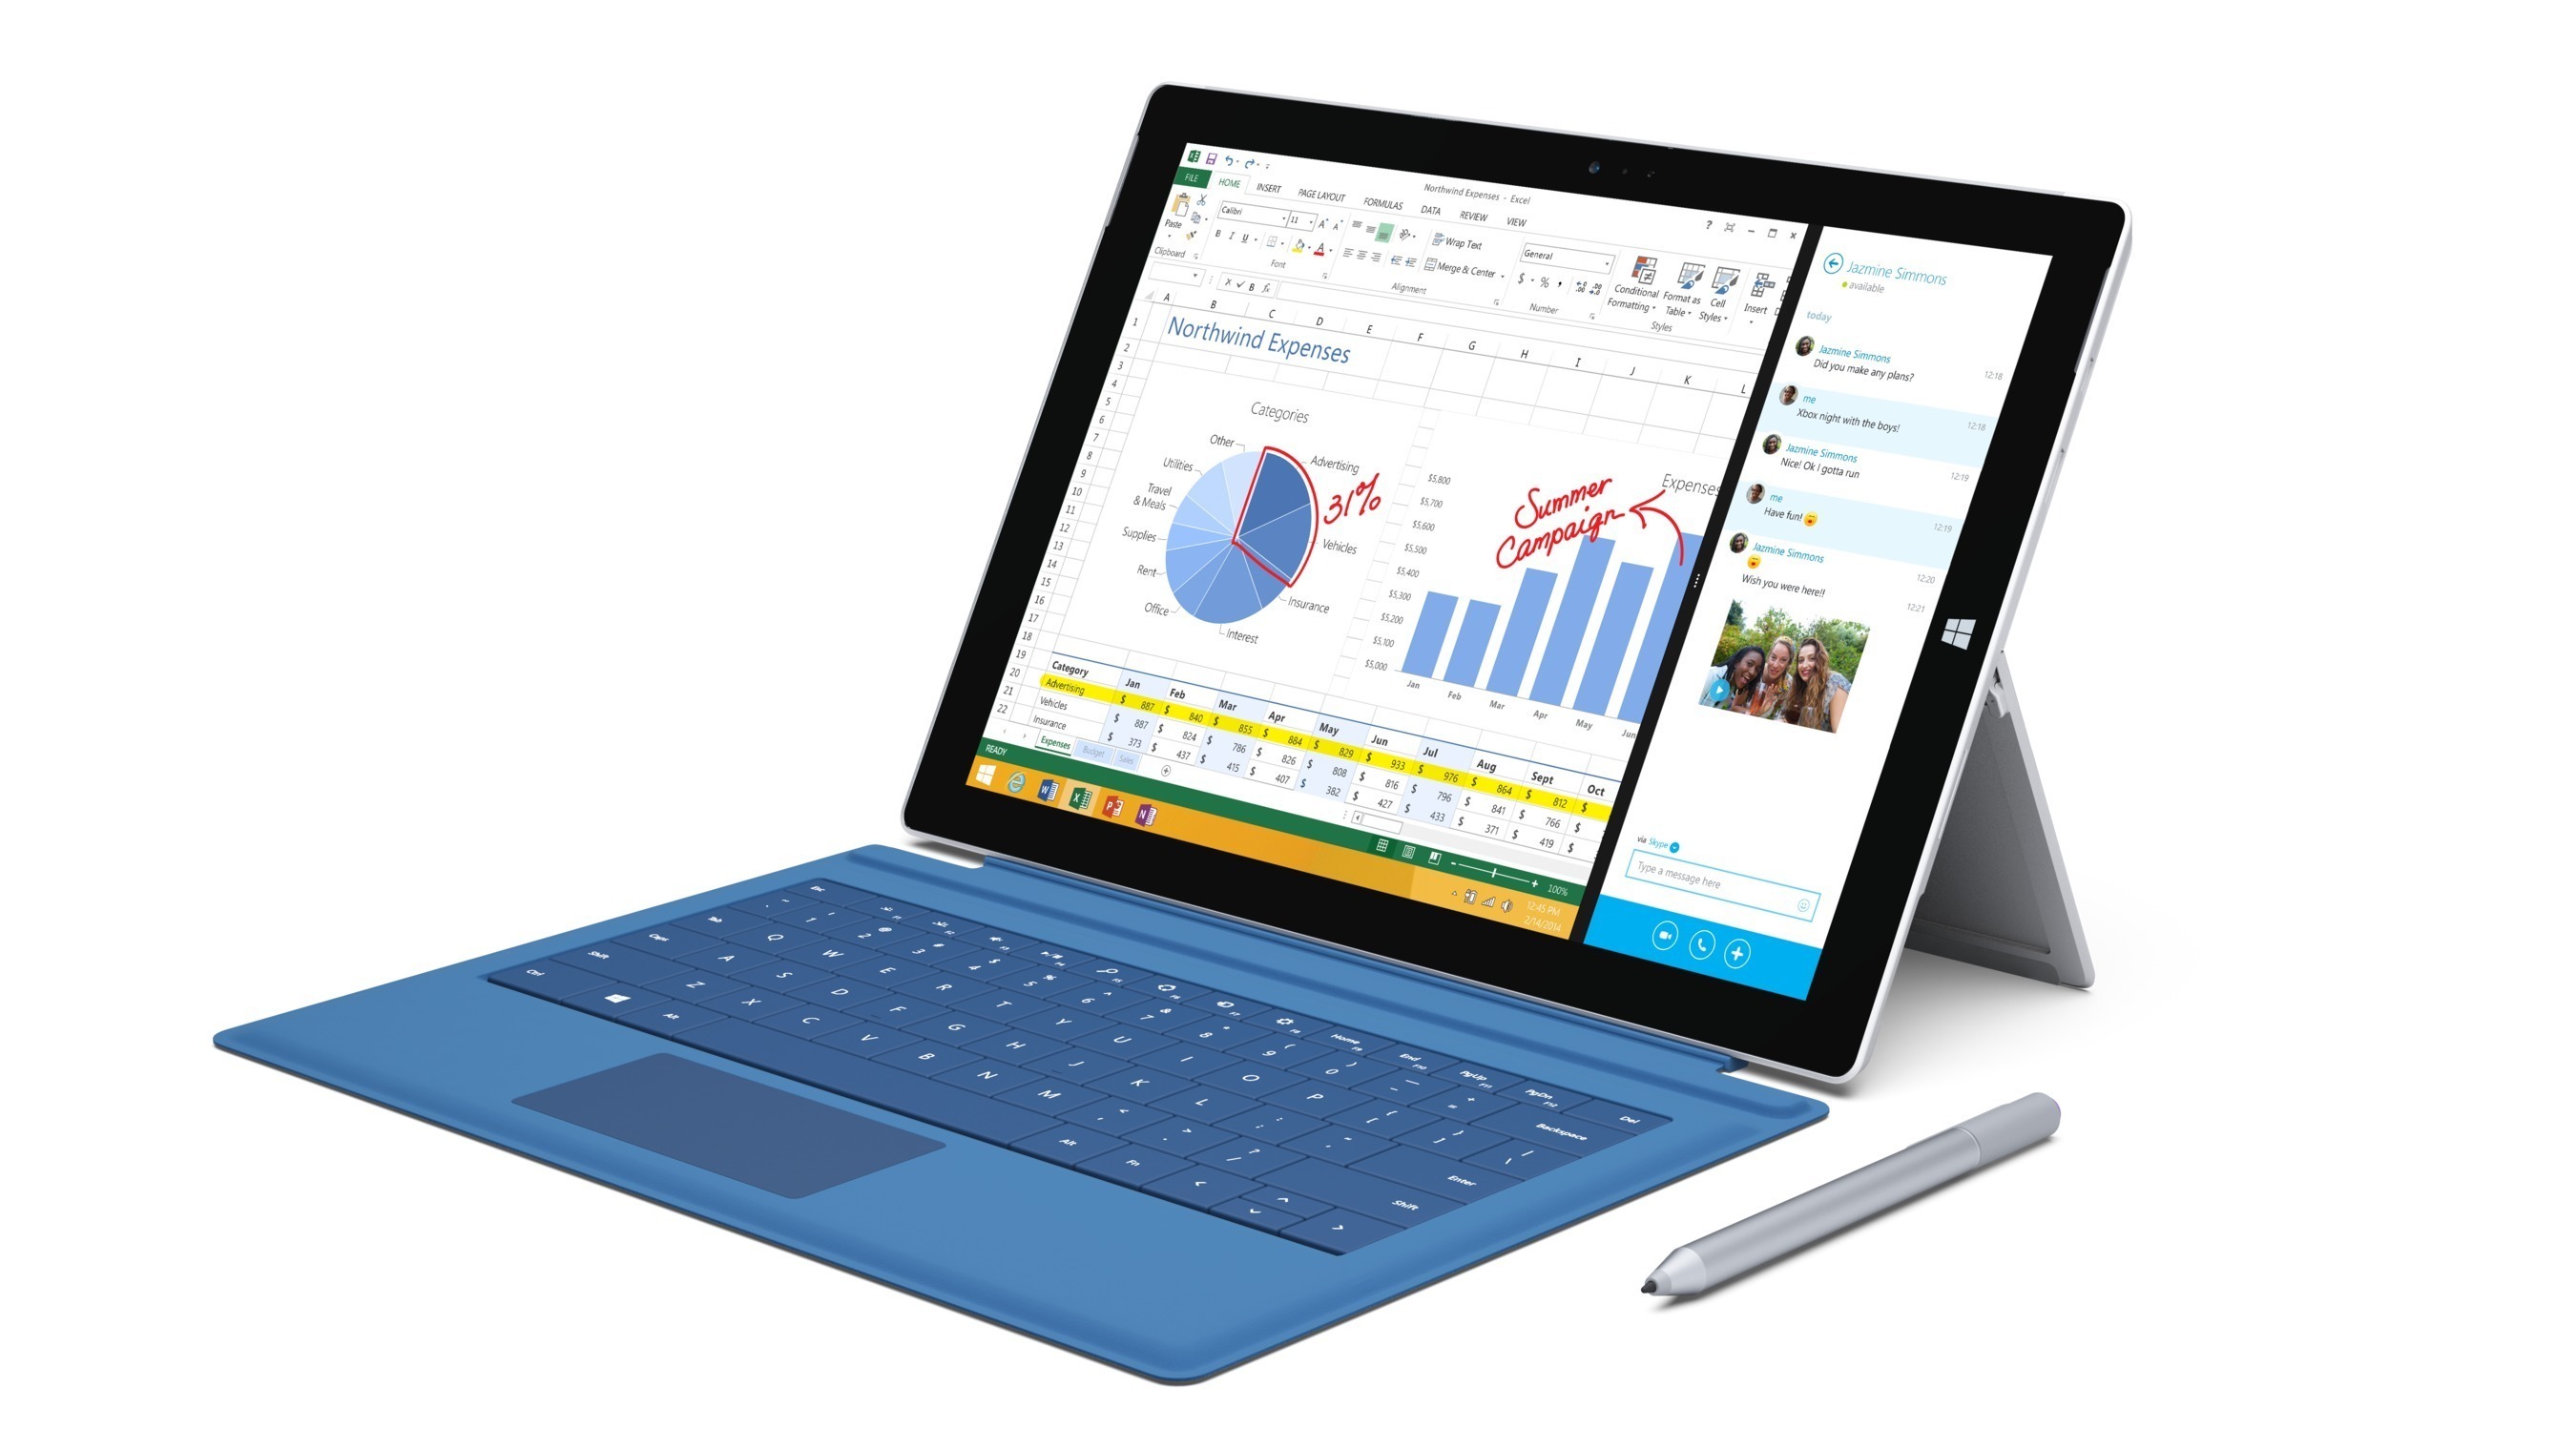 Surface Pro 3 has a 12-inch ClearType Full HD display, 4th-generation Intel(R) Core(TM) processor and up to 8 GB of RAM. With up to nine hours of Web-browsing battery life, Surface Pro 3 has all the power, performance and mobility of a laptop in an incredibly lightweight, versatile form. (PRNewsFoto/Microsoft Corp.)